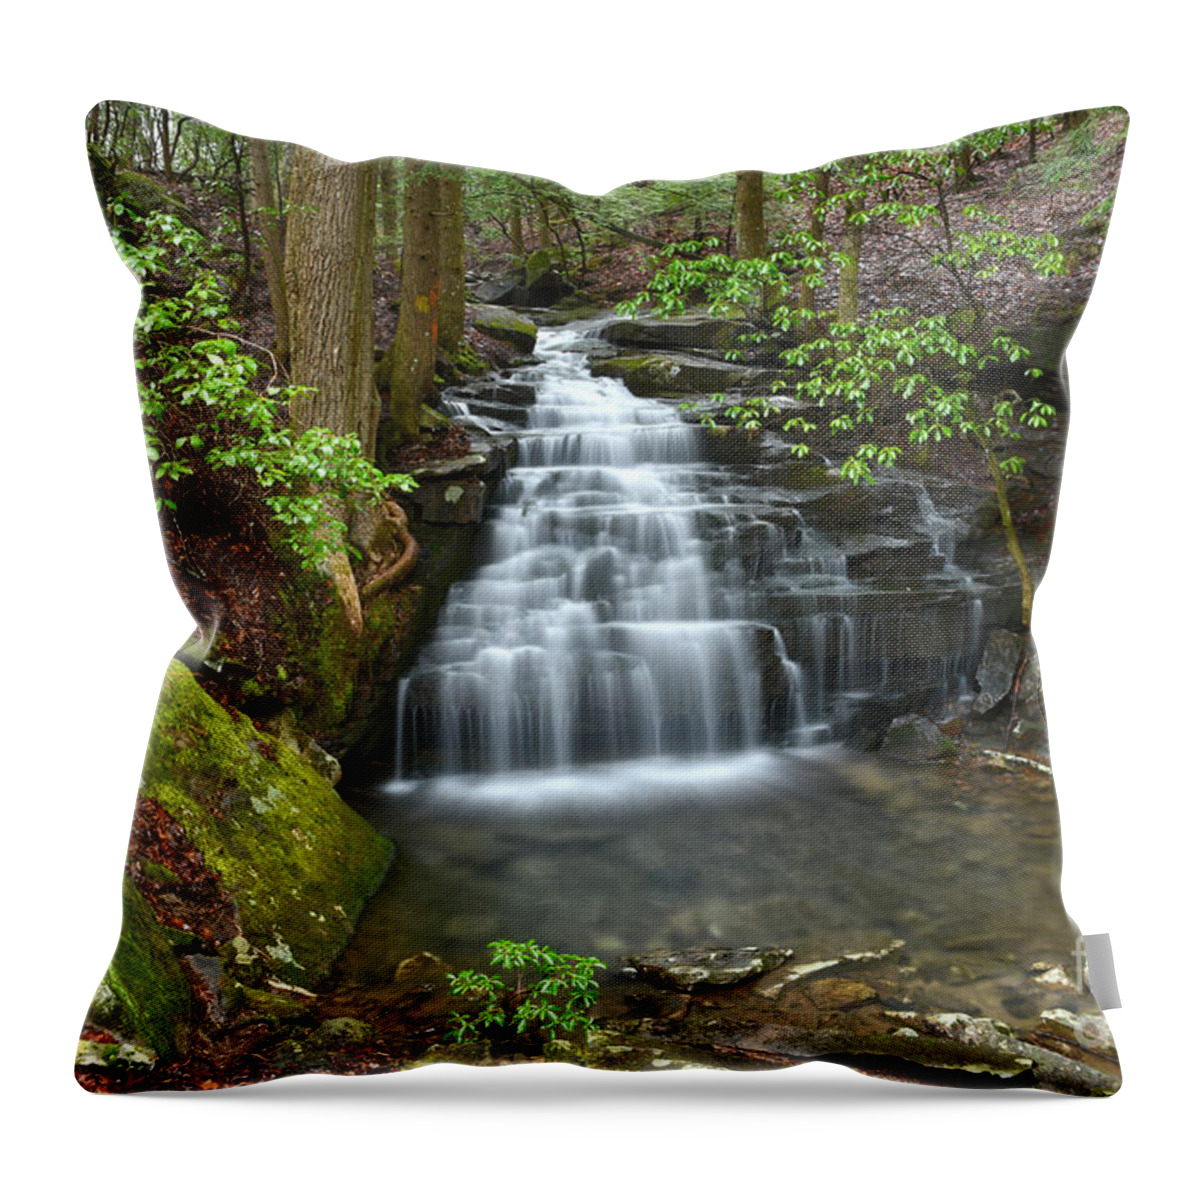 Big Branch Falls Throw Pillow featuring the photograph Big Branch Falls 1 by Phil Perkins